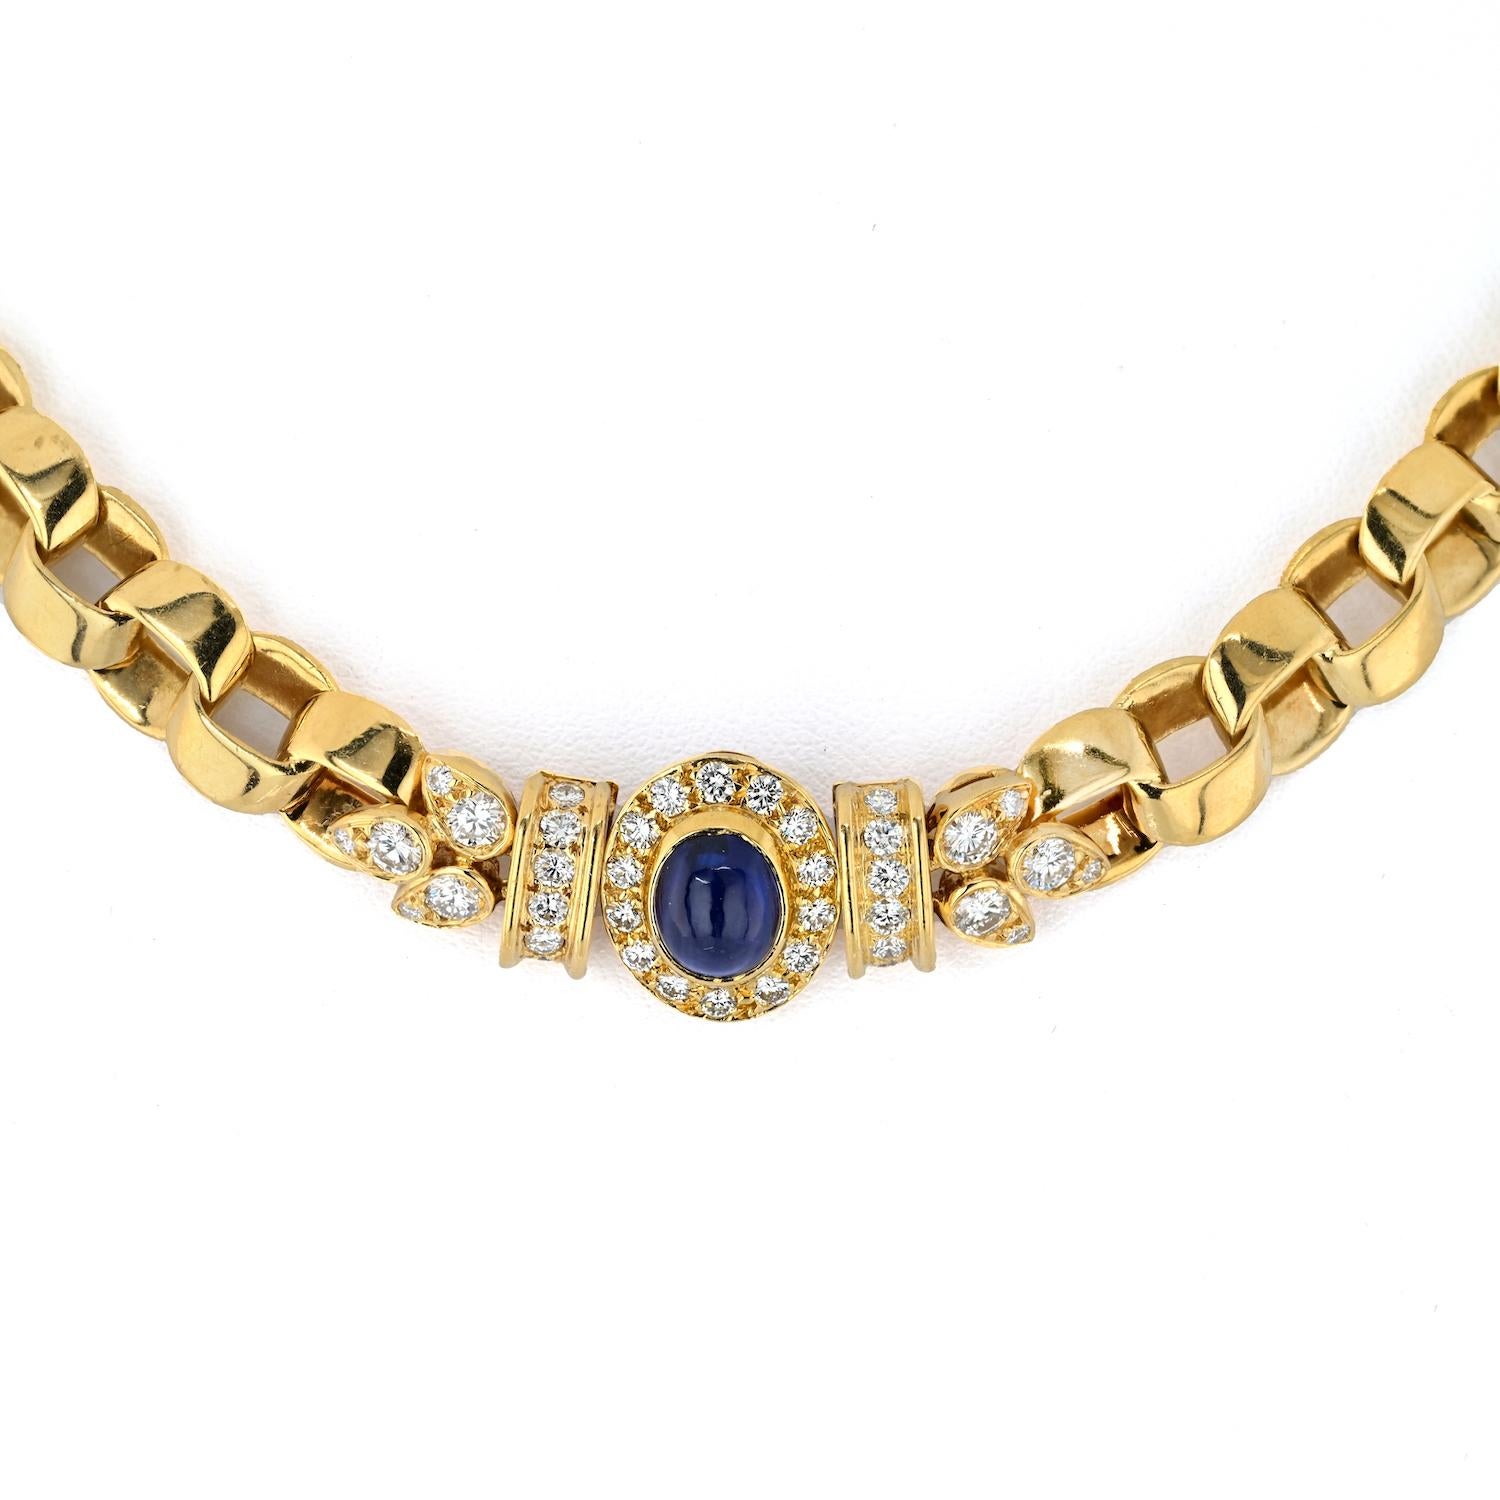 Cabochon Van Cleef & Arpels 18k Yellow Gold Diamond and Sapphire Curb Link Chain Necklace